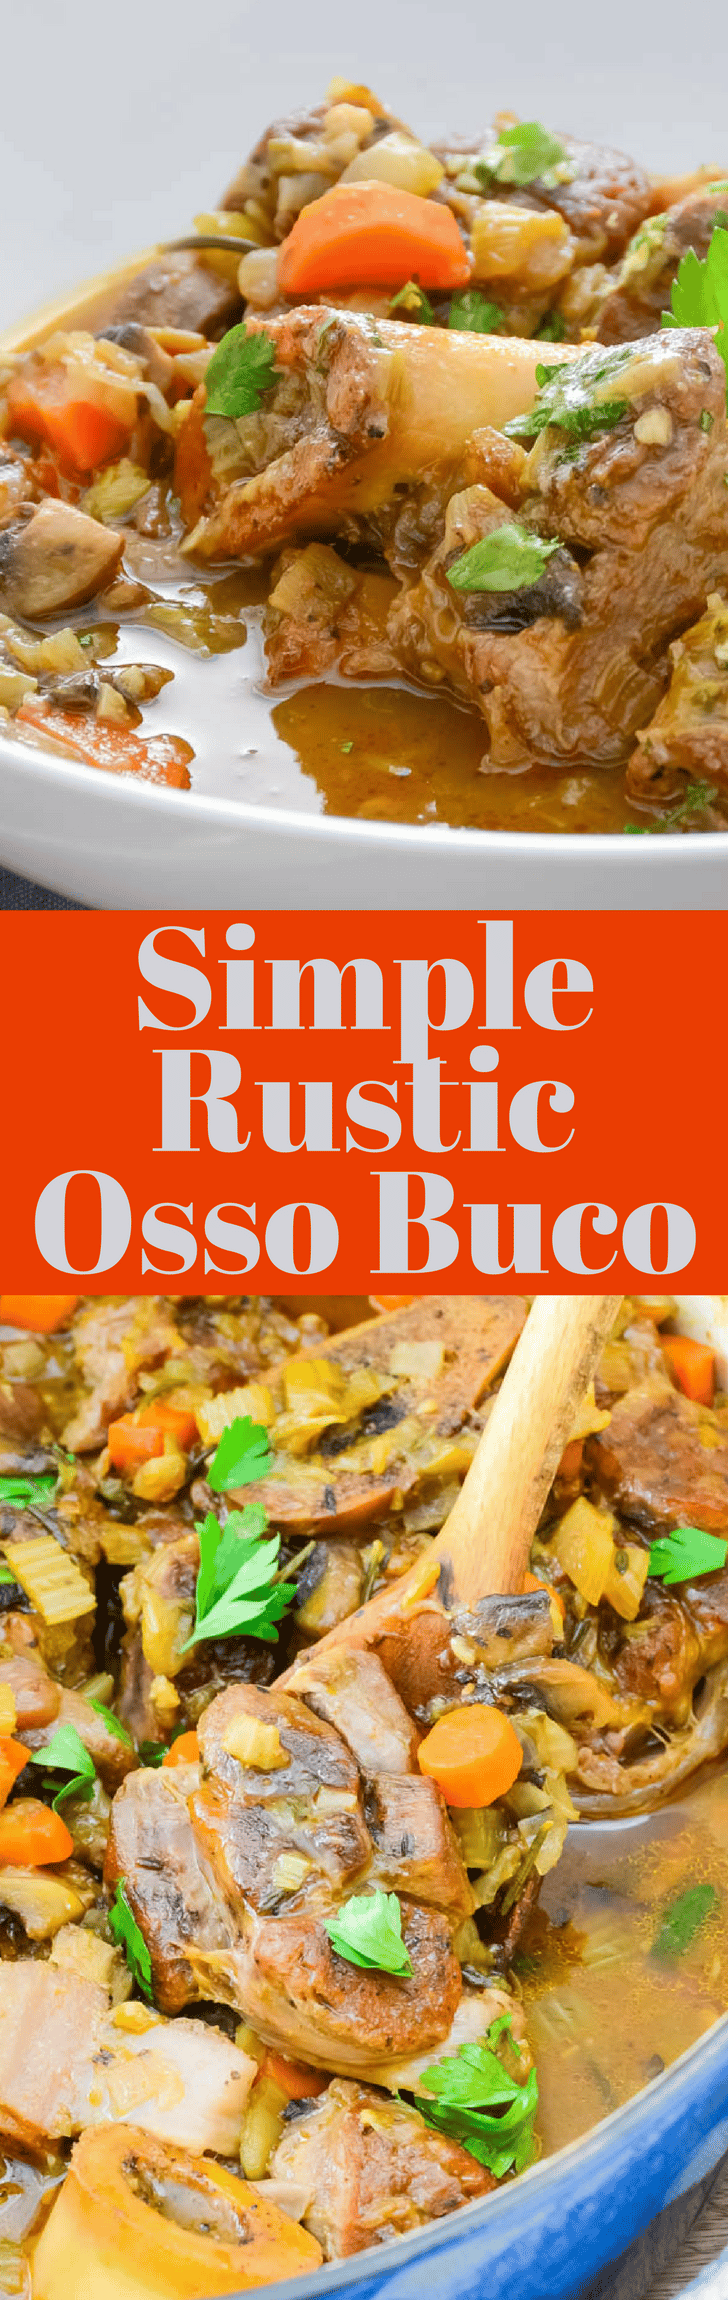 This easy veal shanks recipe is the best comfort food! Simple Rustic Osso Buco is loaded with vegetables and a mouthwatering sauce. Finish with gremolata.